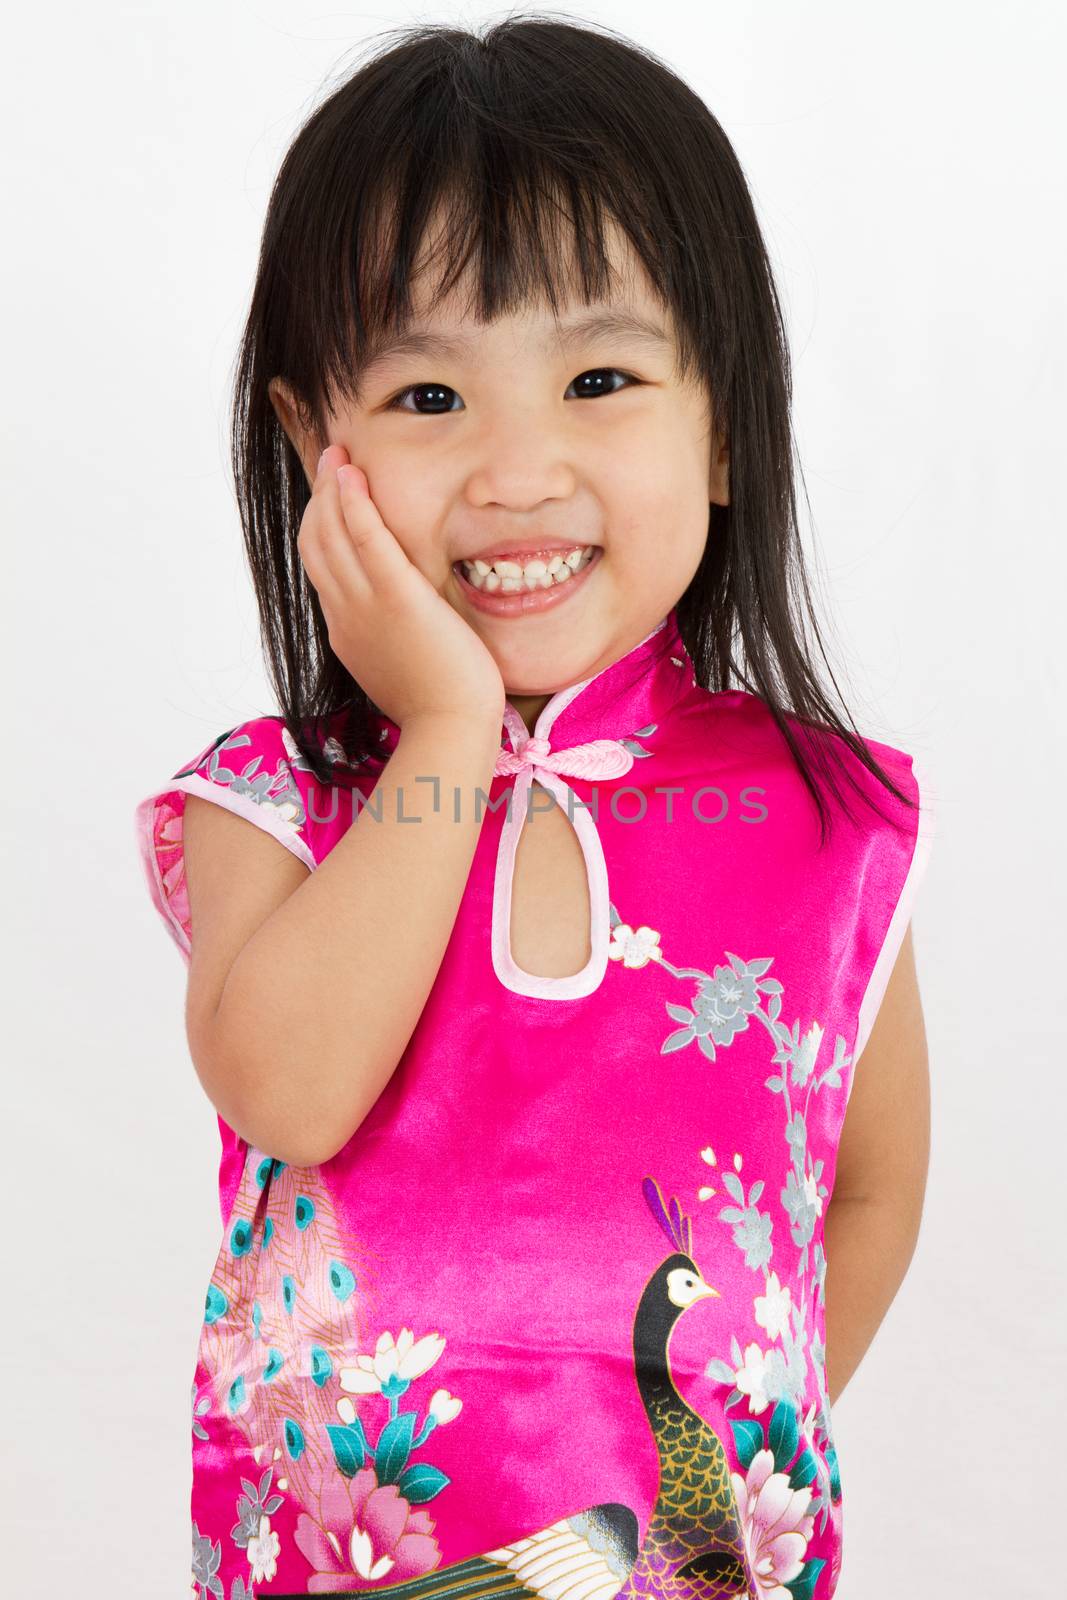 Chinese Little Girl wearing Cheongsam with greeting gesture in plain white background.